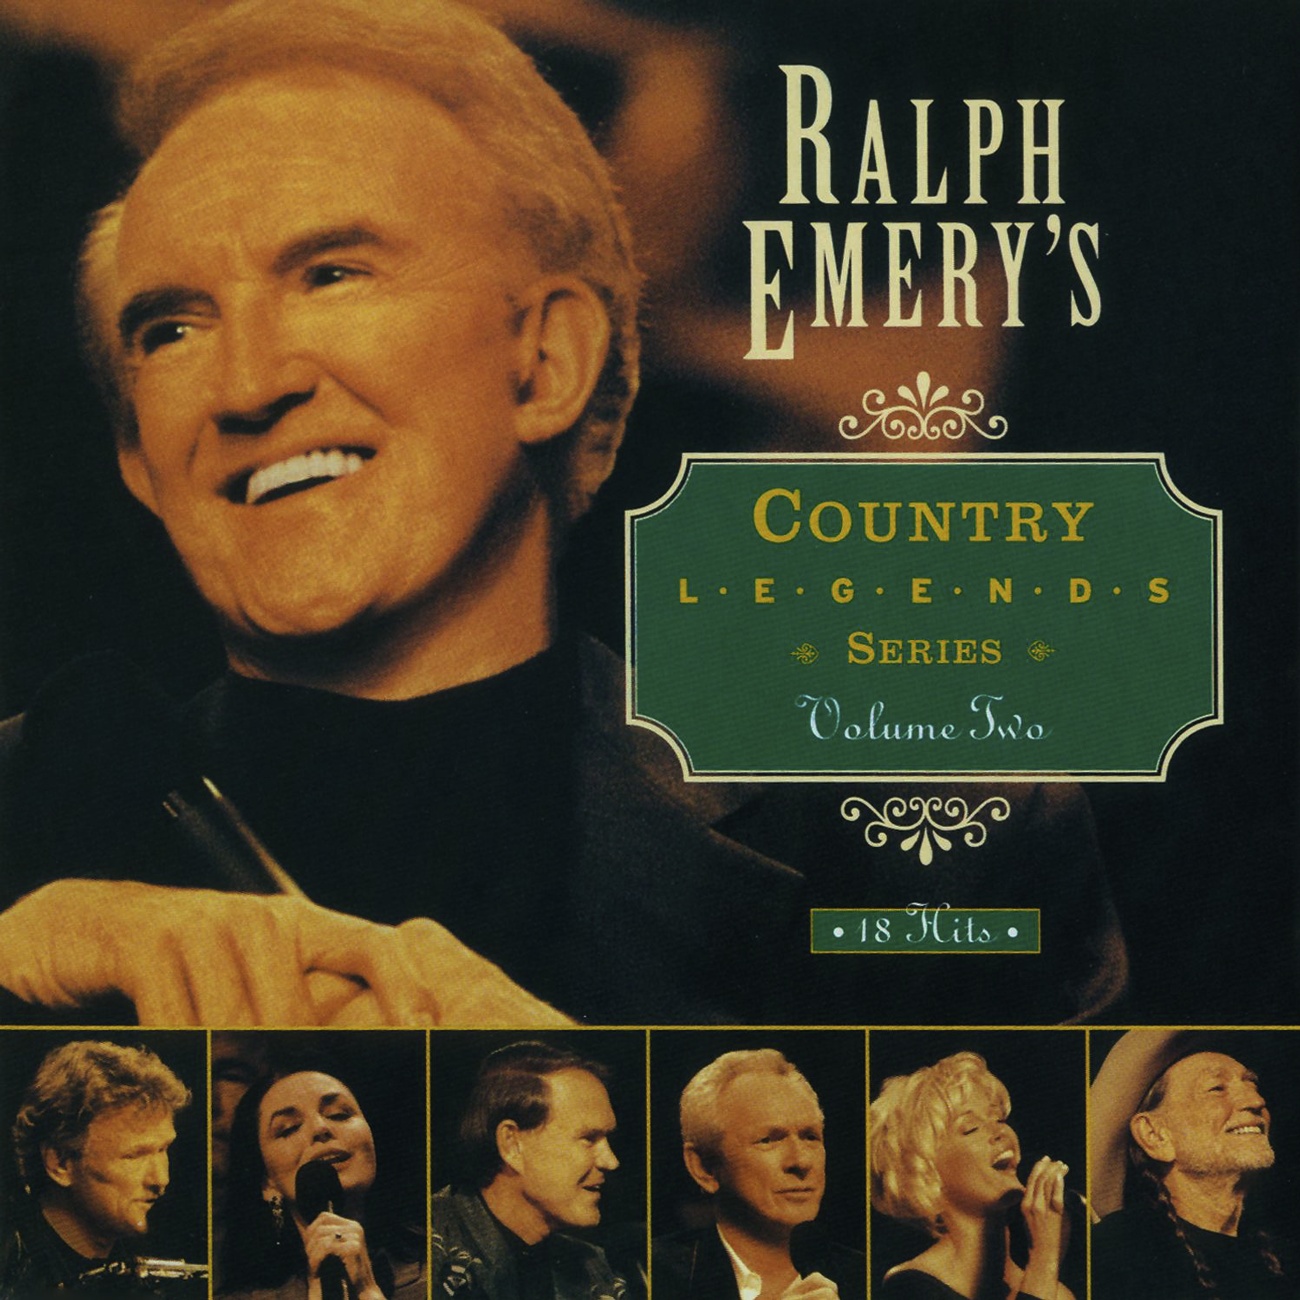 500 Miles Away From Home (Ralph Emery's Country Legends Homecoming Vol 2 album version)